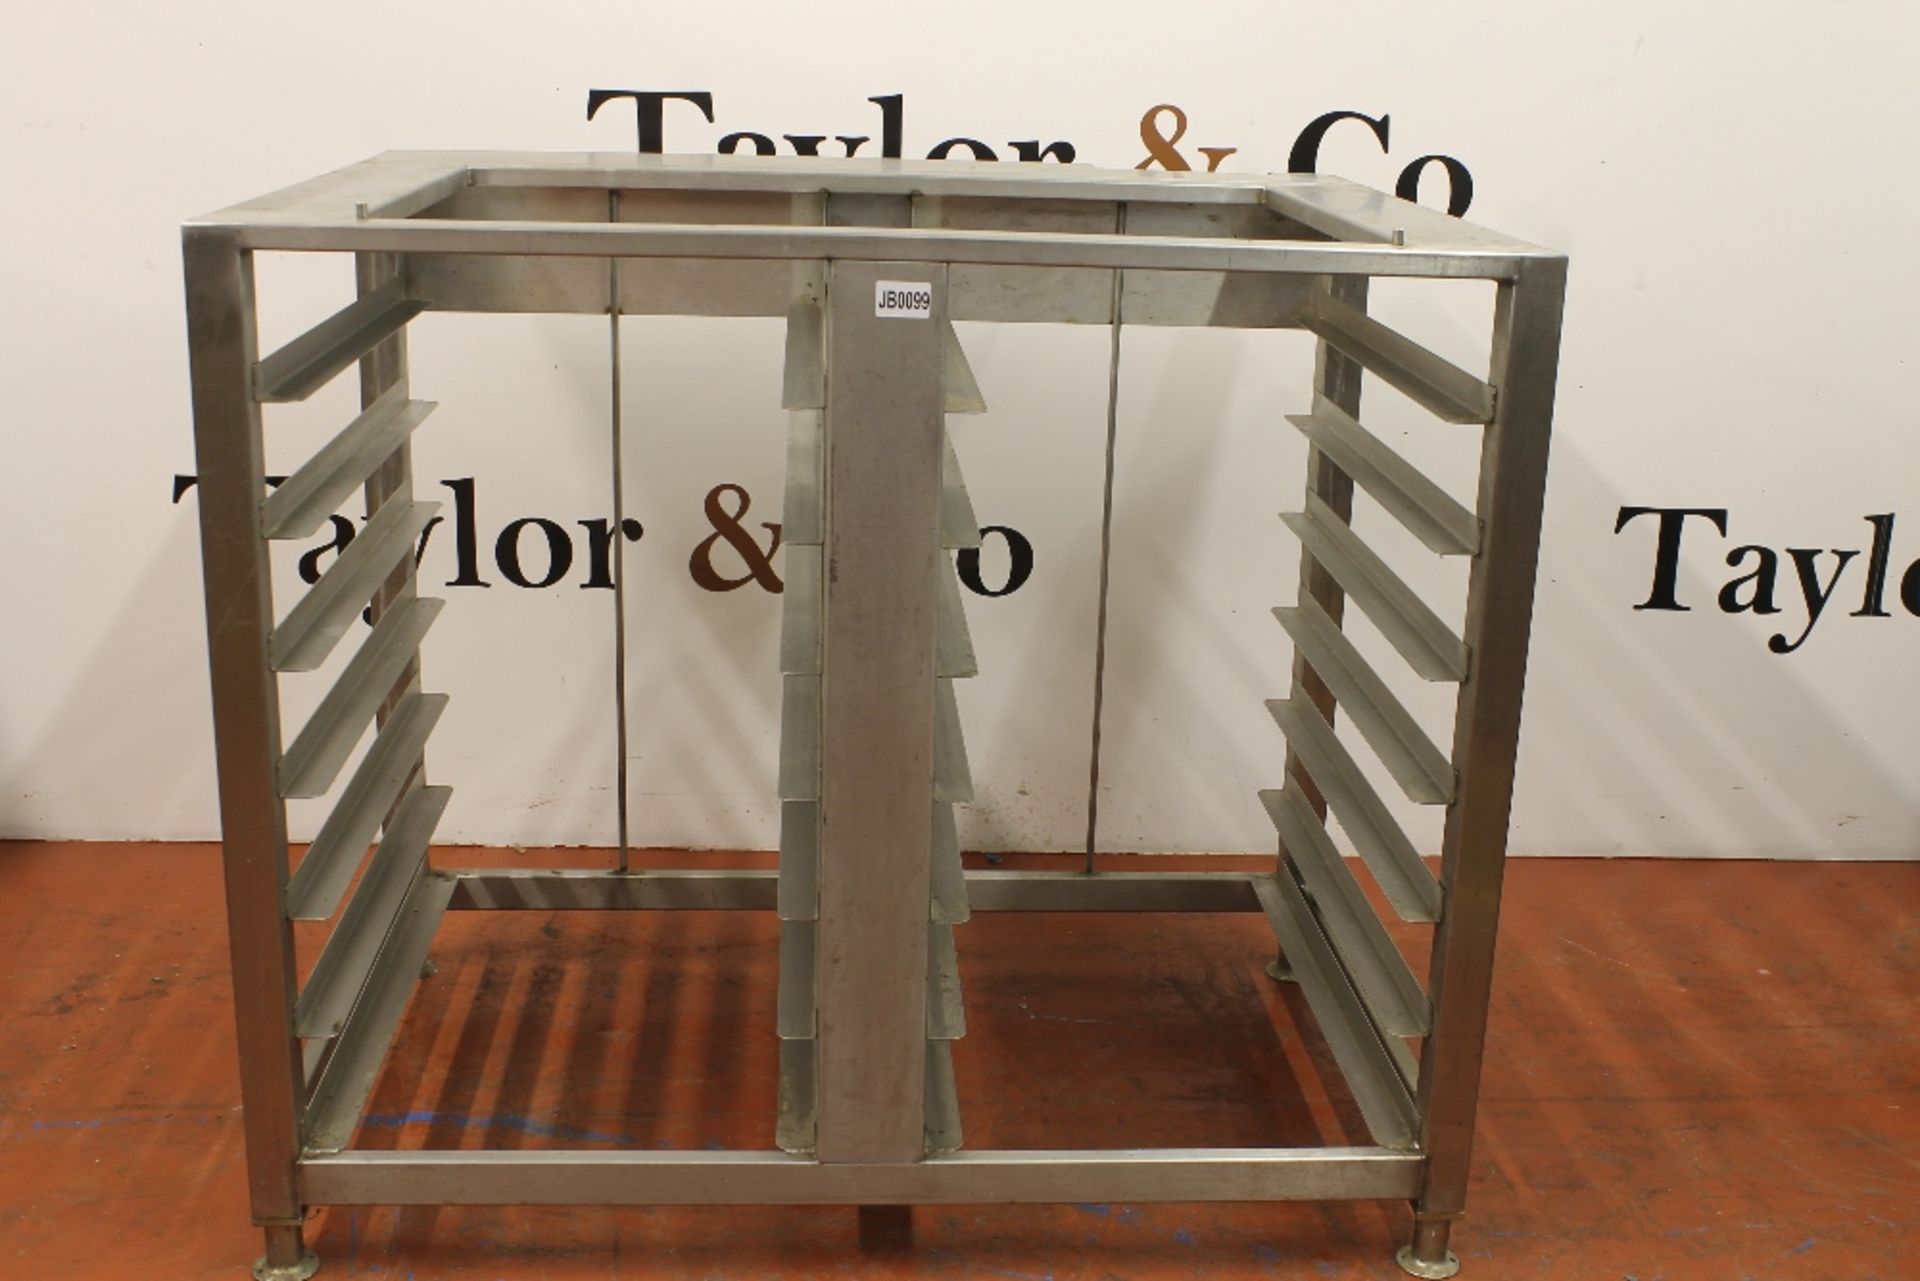 Stainless Steel Oven Stand with Under Tray Storage W98cm x H84cm x D76cm - Image 2 of 2